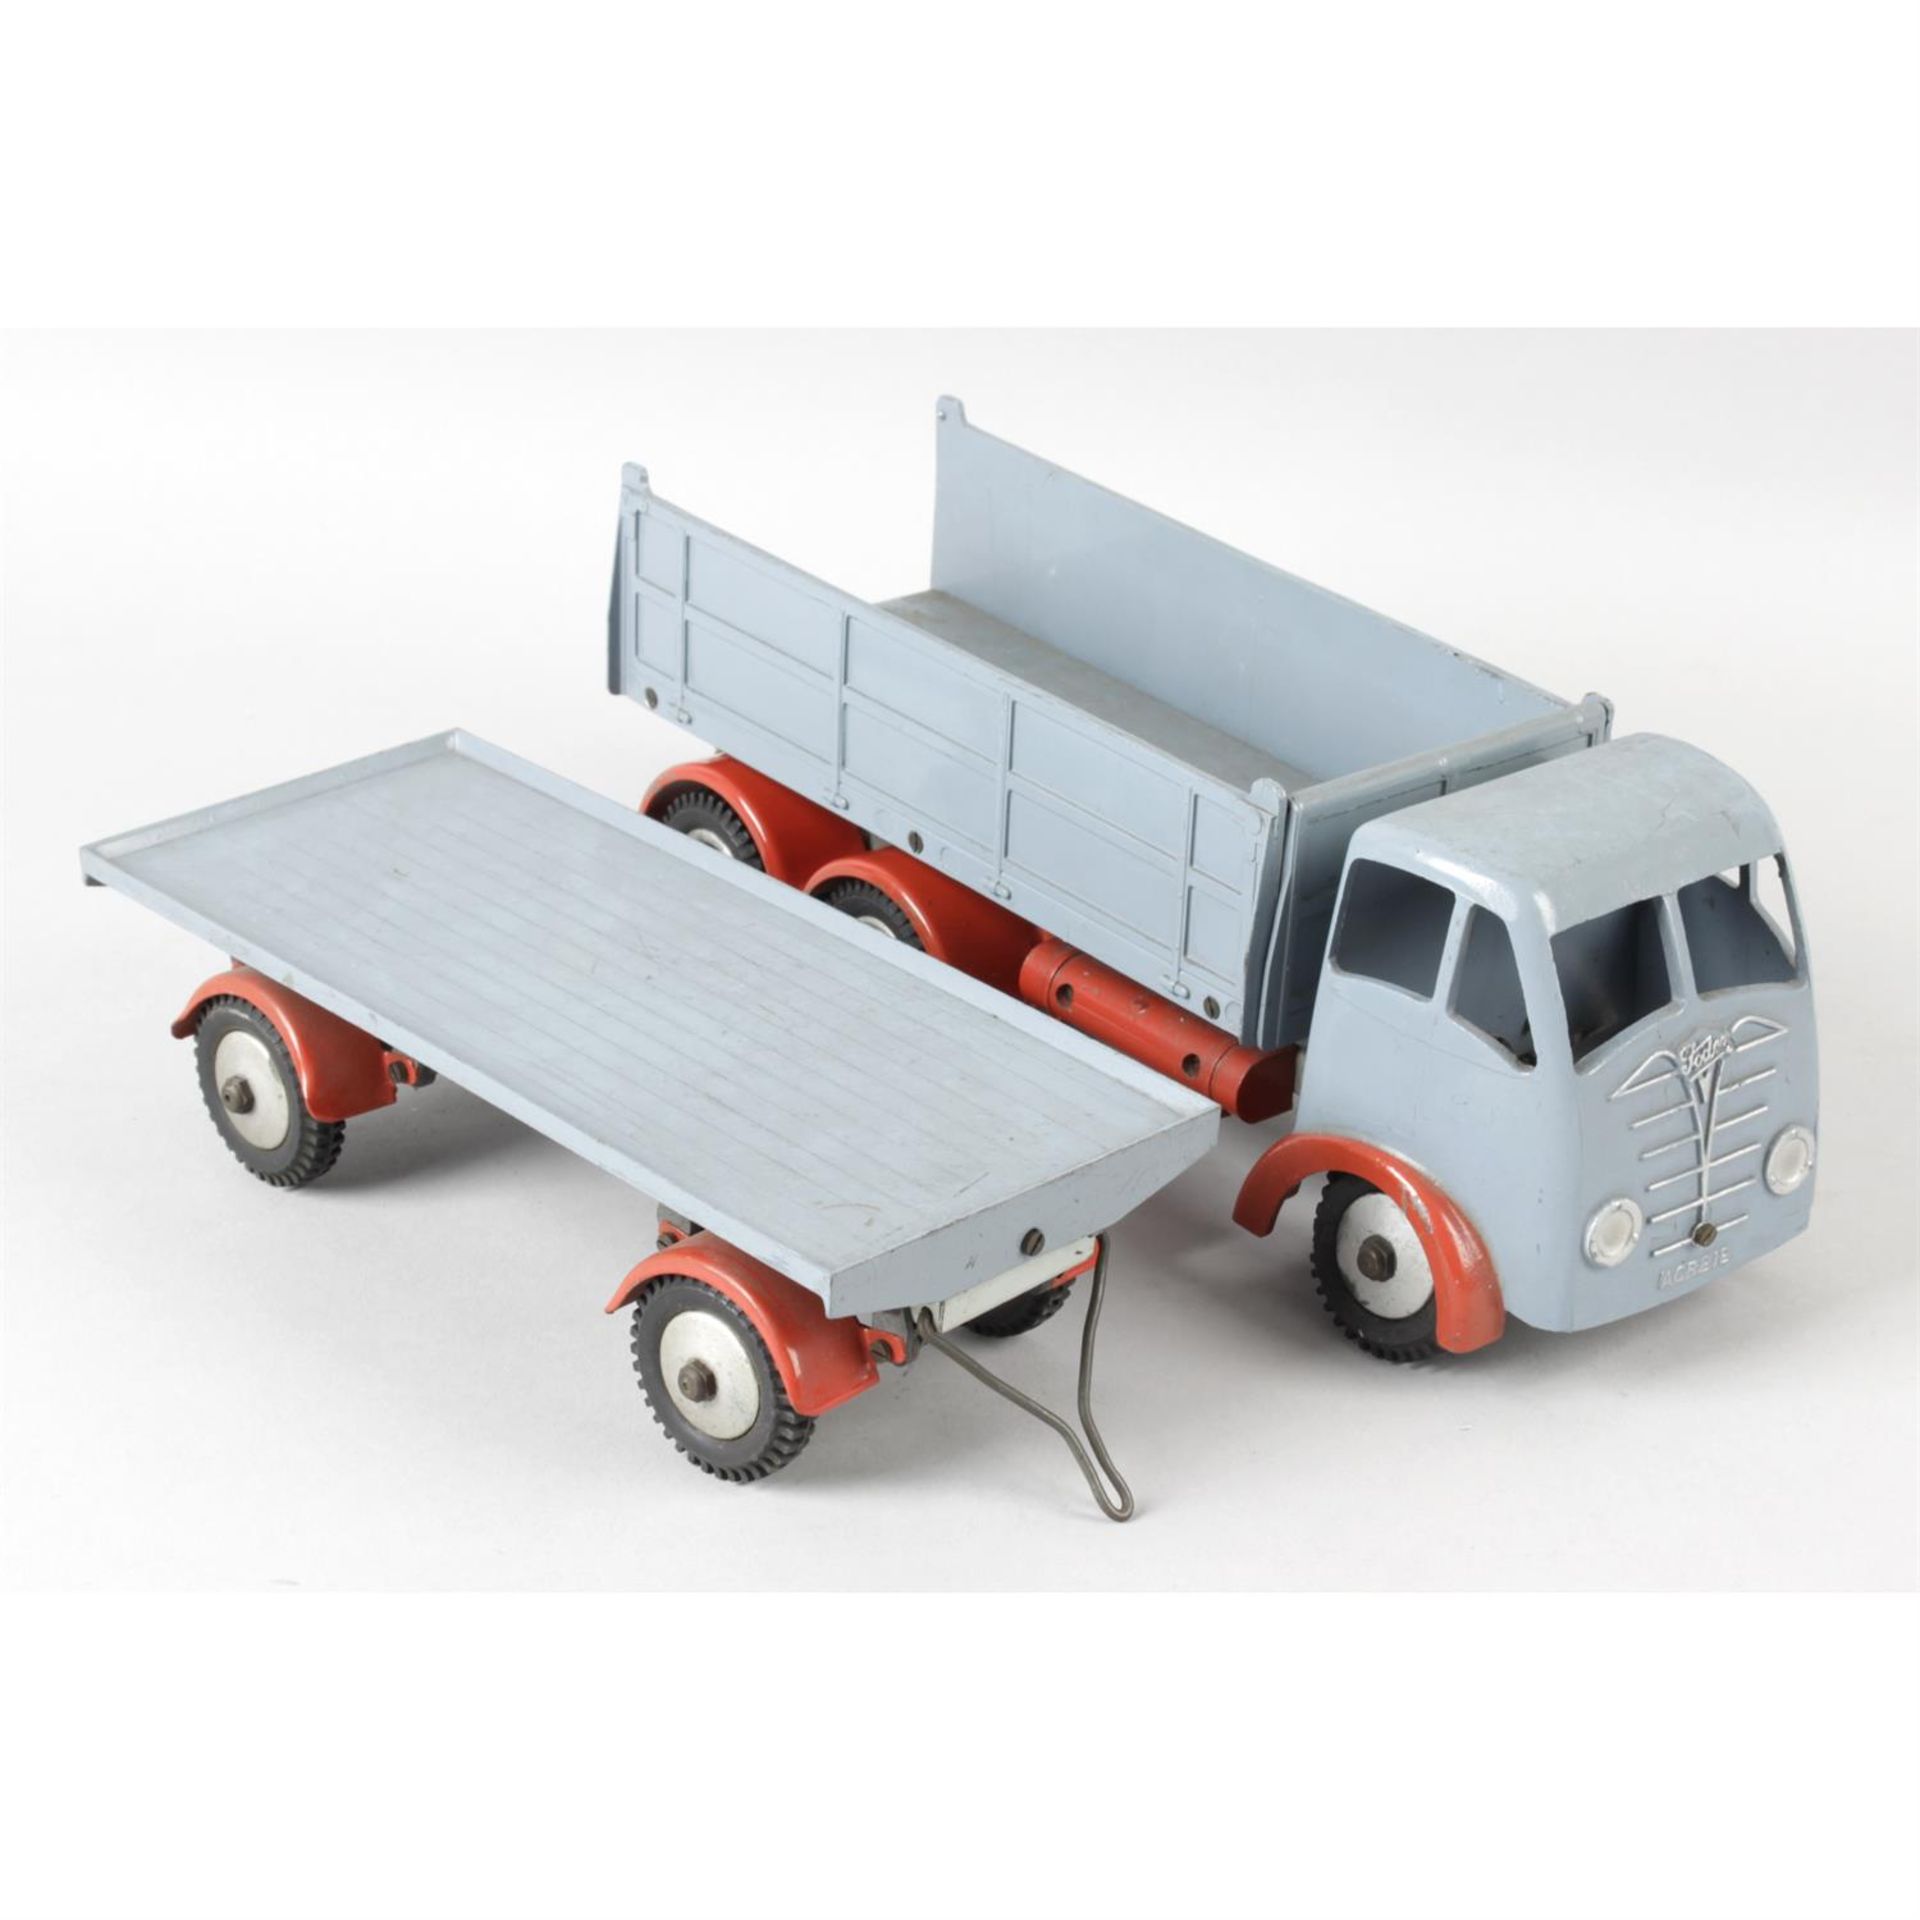 A Shackleton die cast mechanical scale model Foden F.G (tipper) lorry, together with a similar